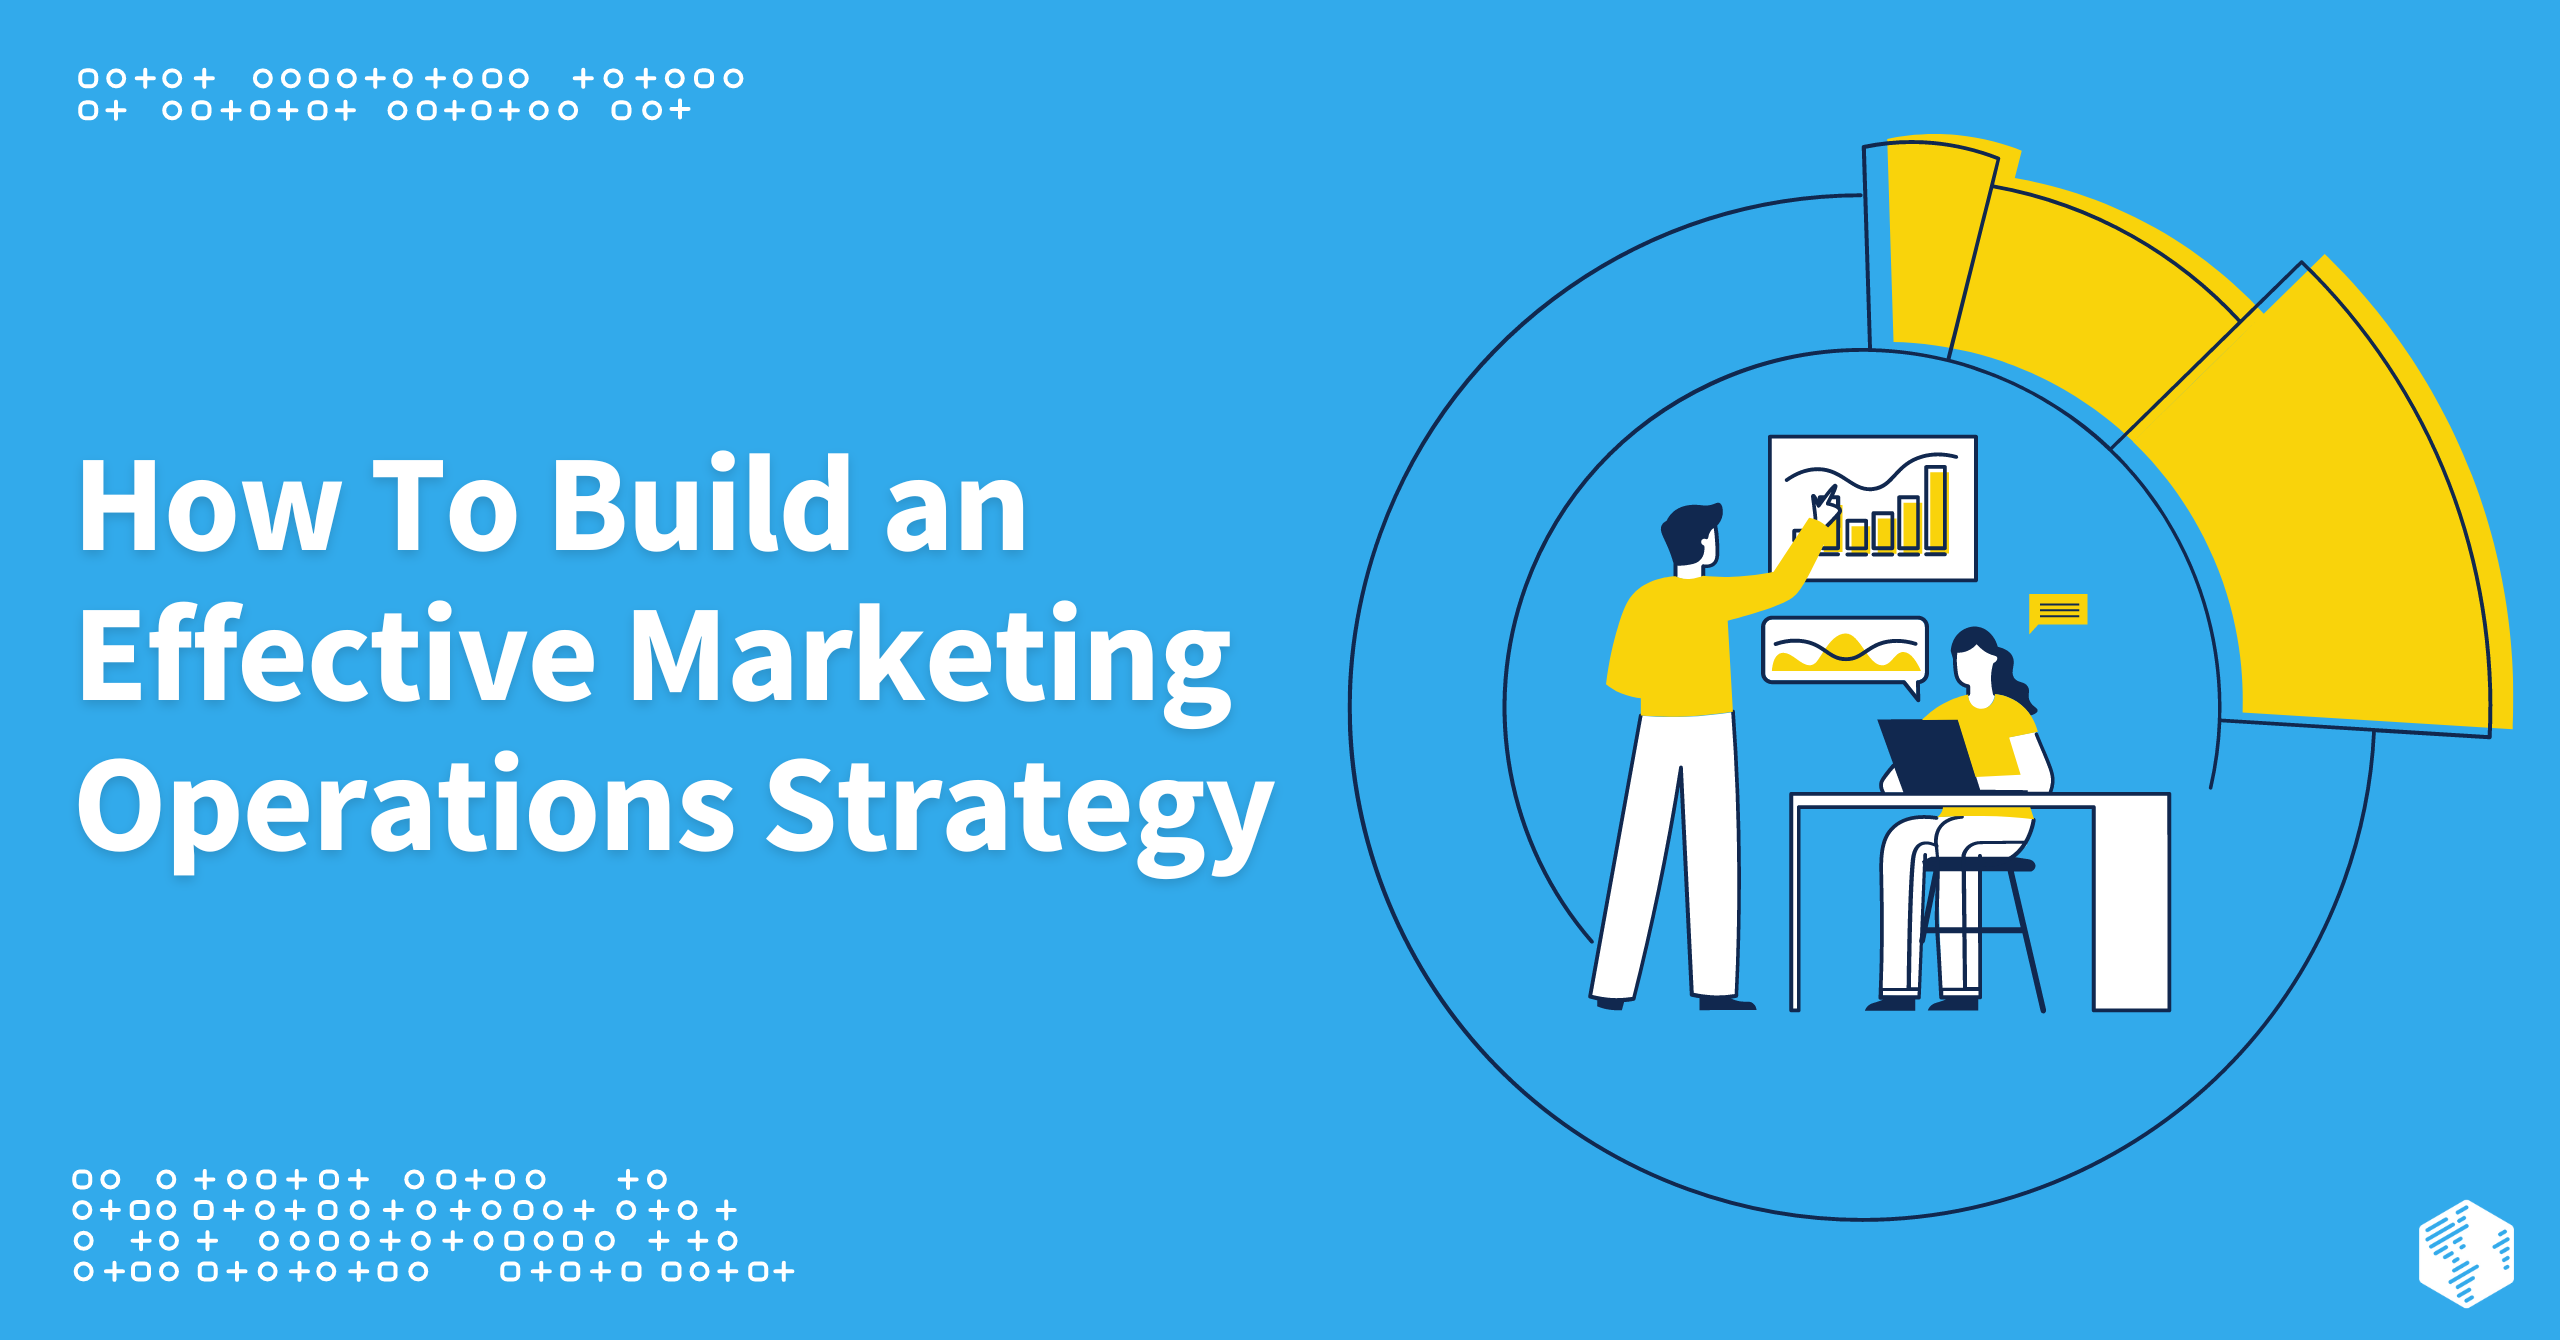 6 Steps to Building an Effective Marketing Operations Strategy